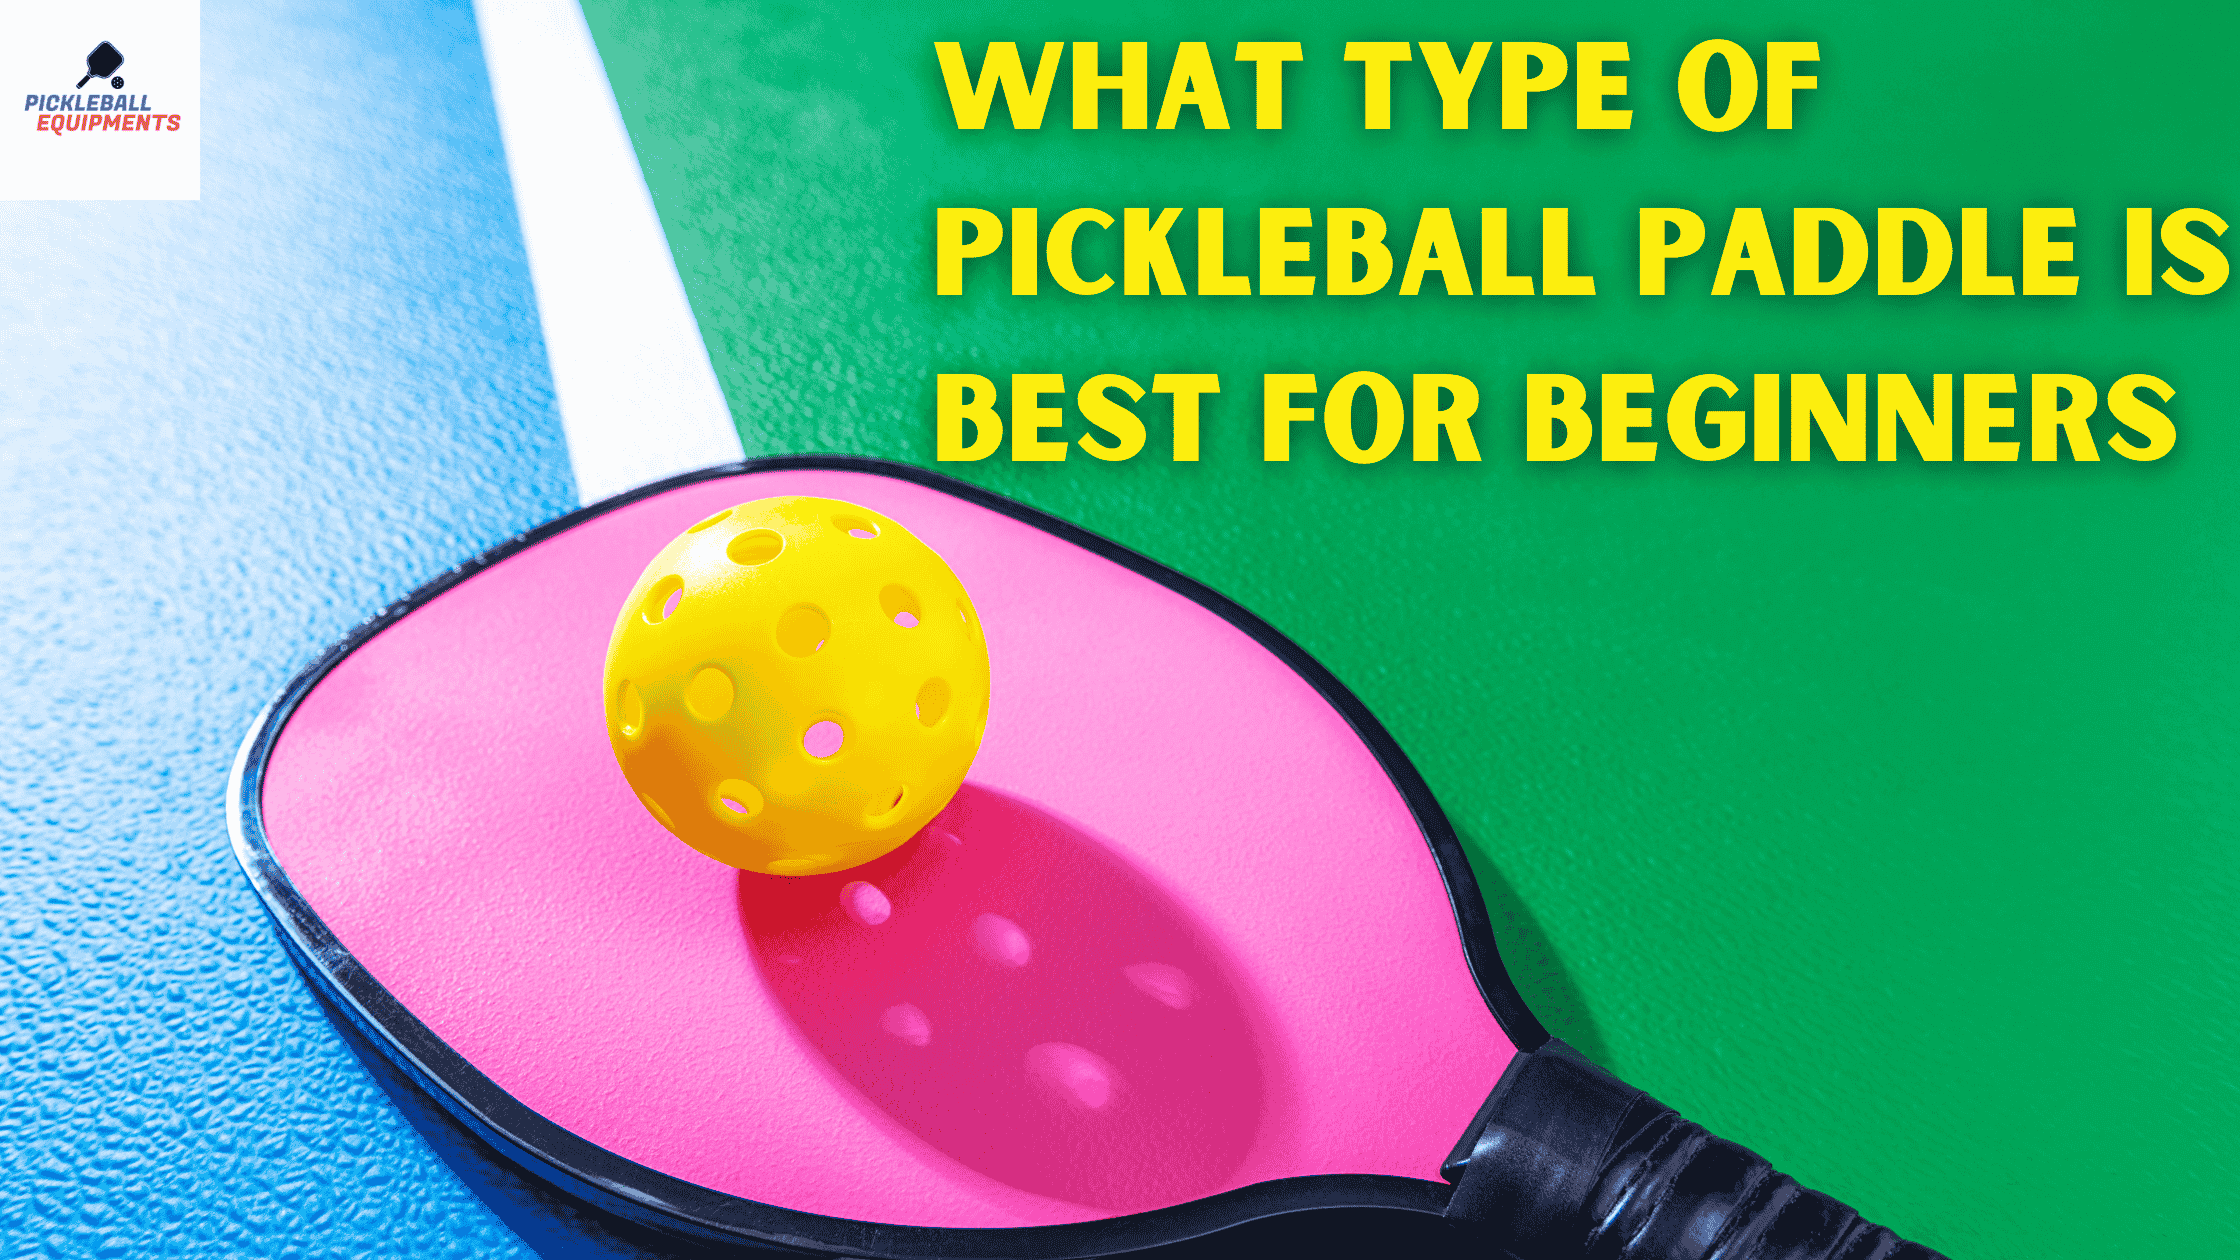 What-Type-of-Pickleball-Paddle-Is-Best-for-Beginners